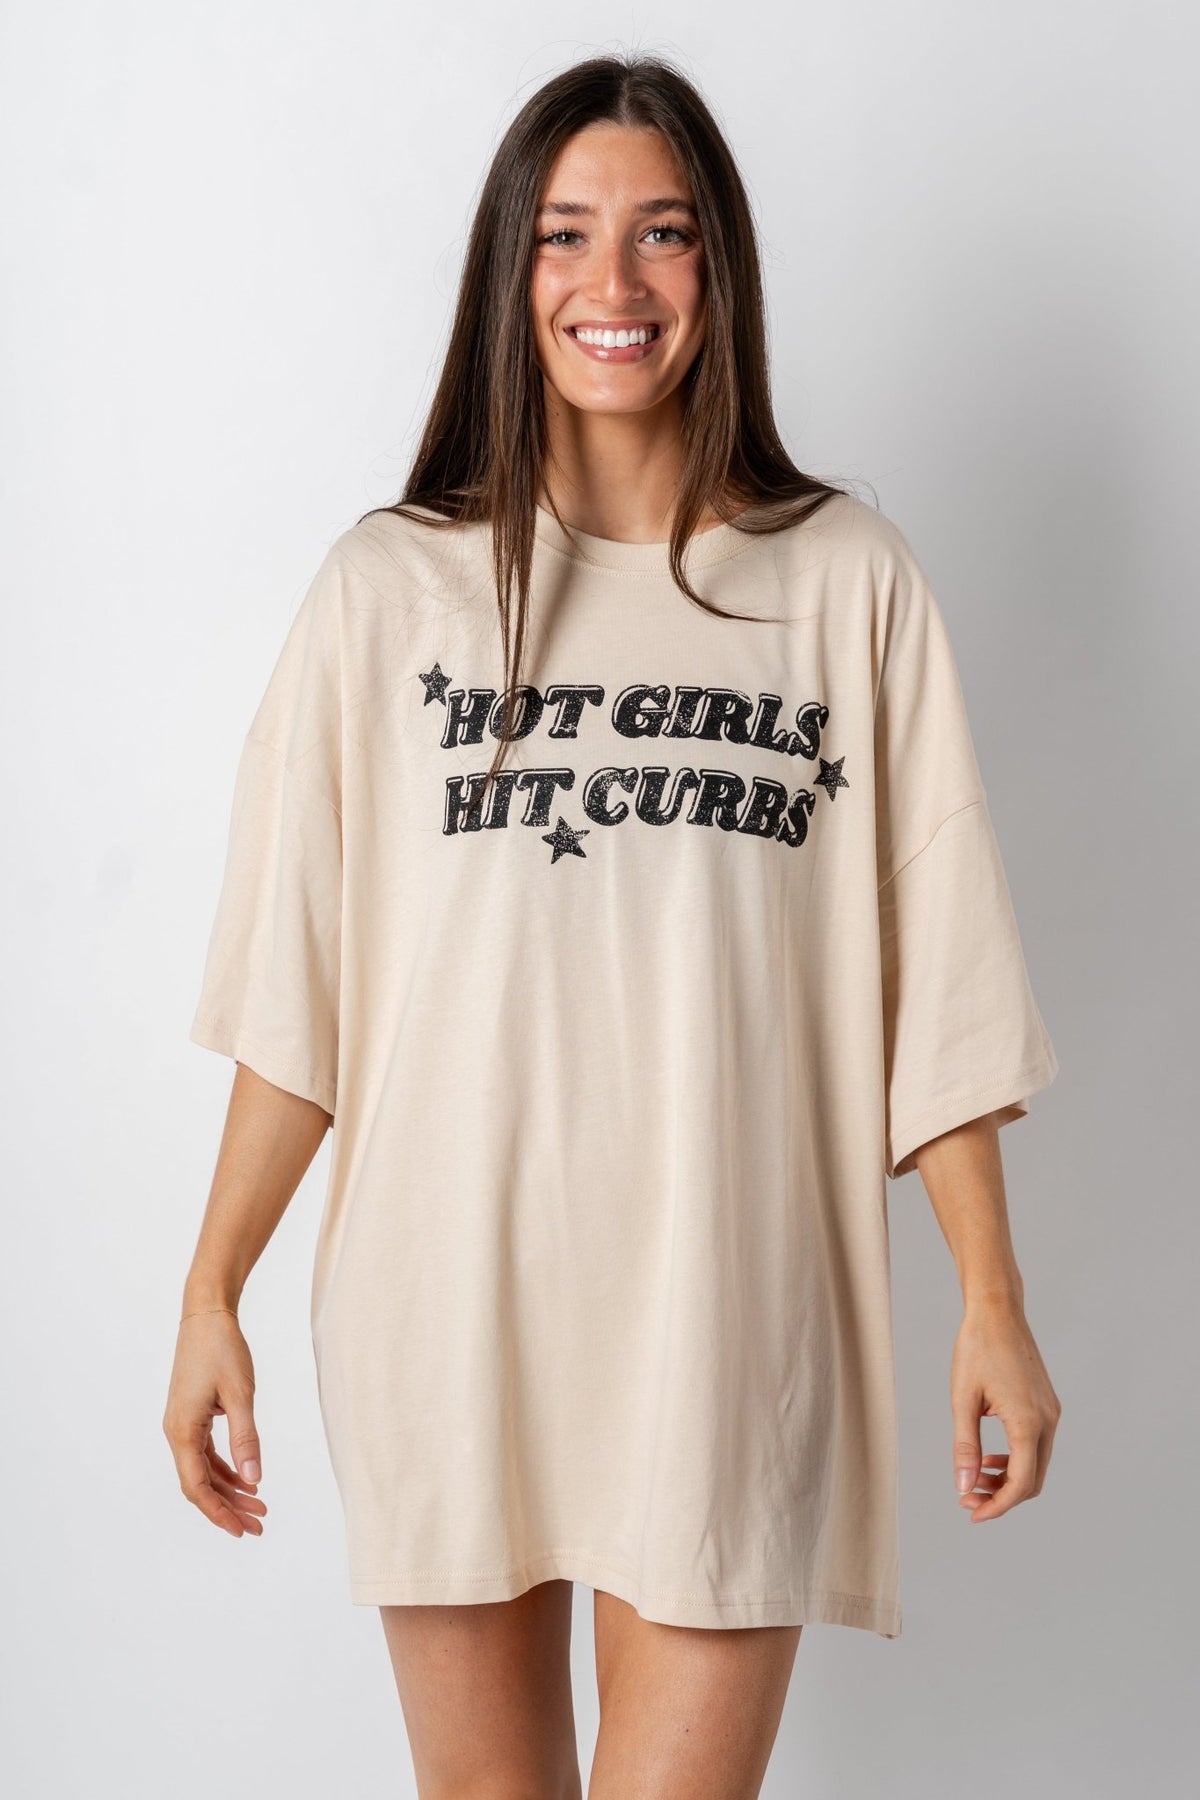 Hot girls hit curbs oversized t-shirt off white - Stylish T-shirts - Trendy Graphic T-Shirts and Tank Tops at Lush Fashion Lounge Boutique in Oklahoma City